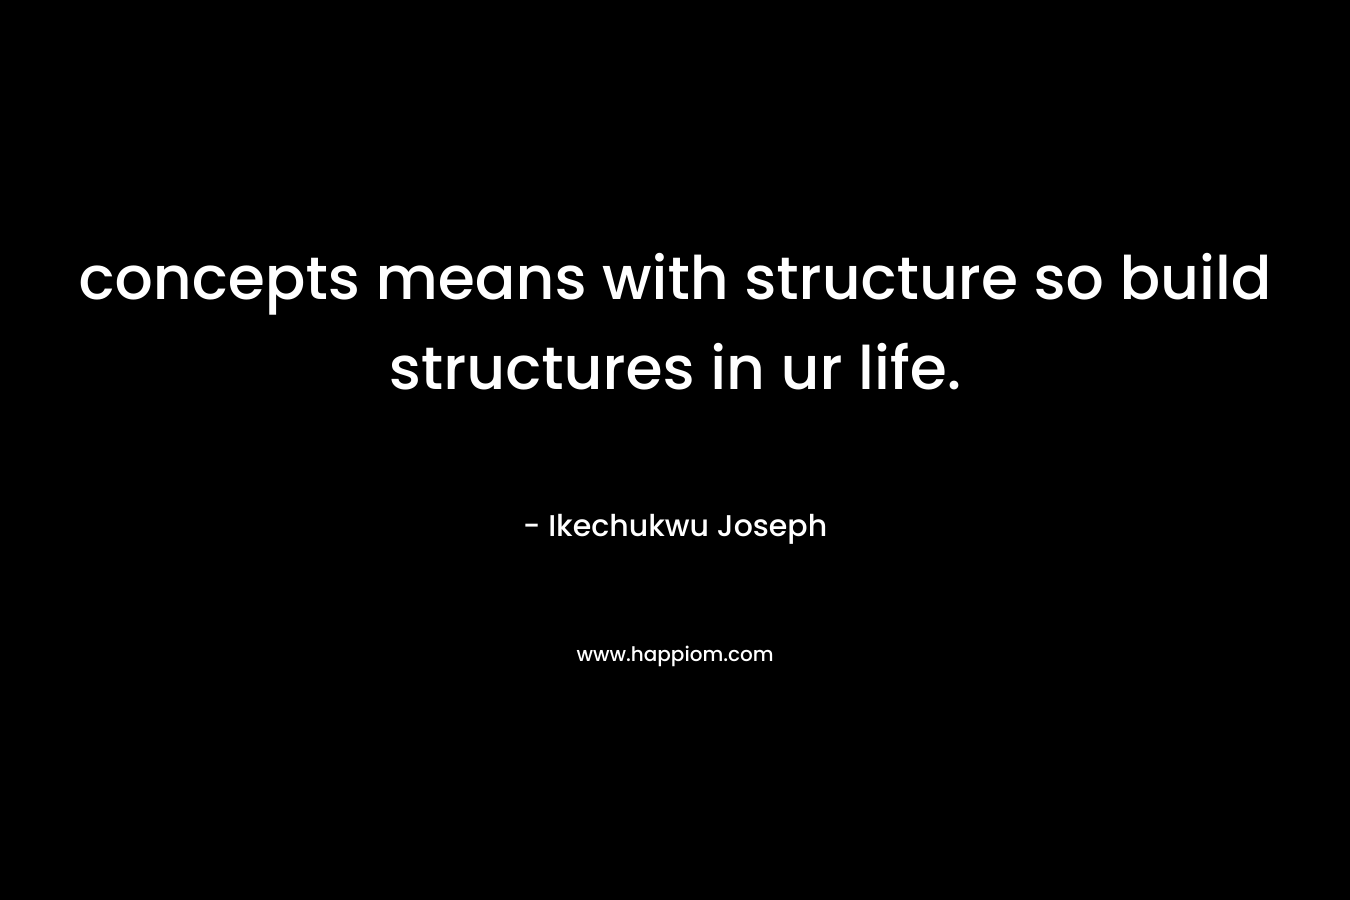 concepts means with structure so build structures in ur life.